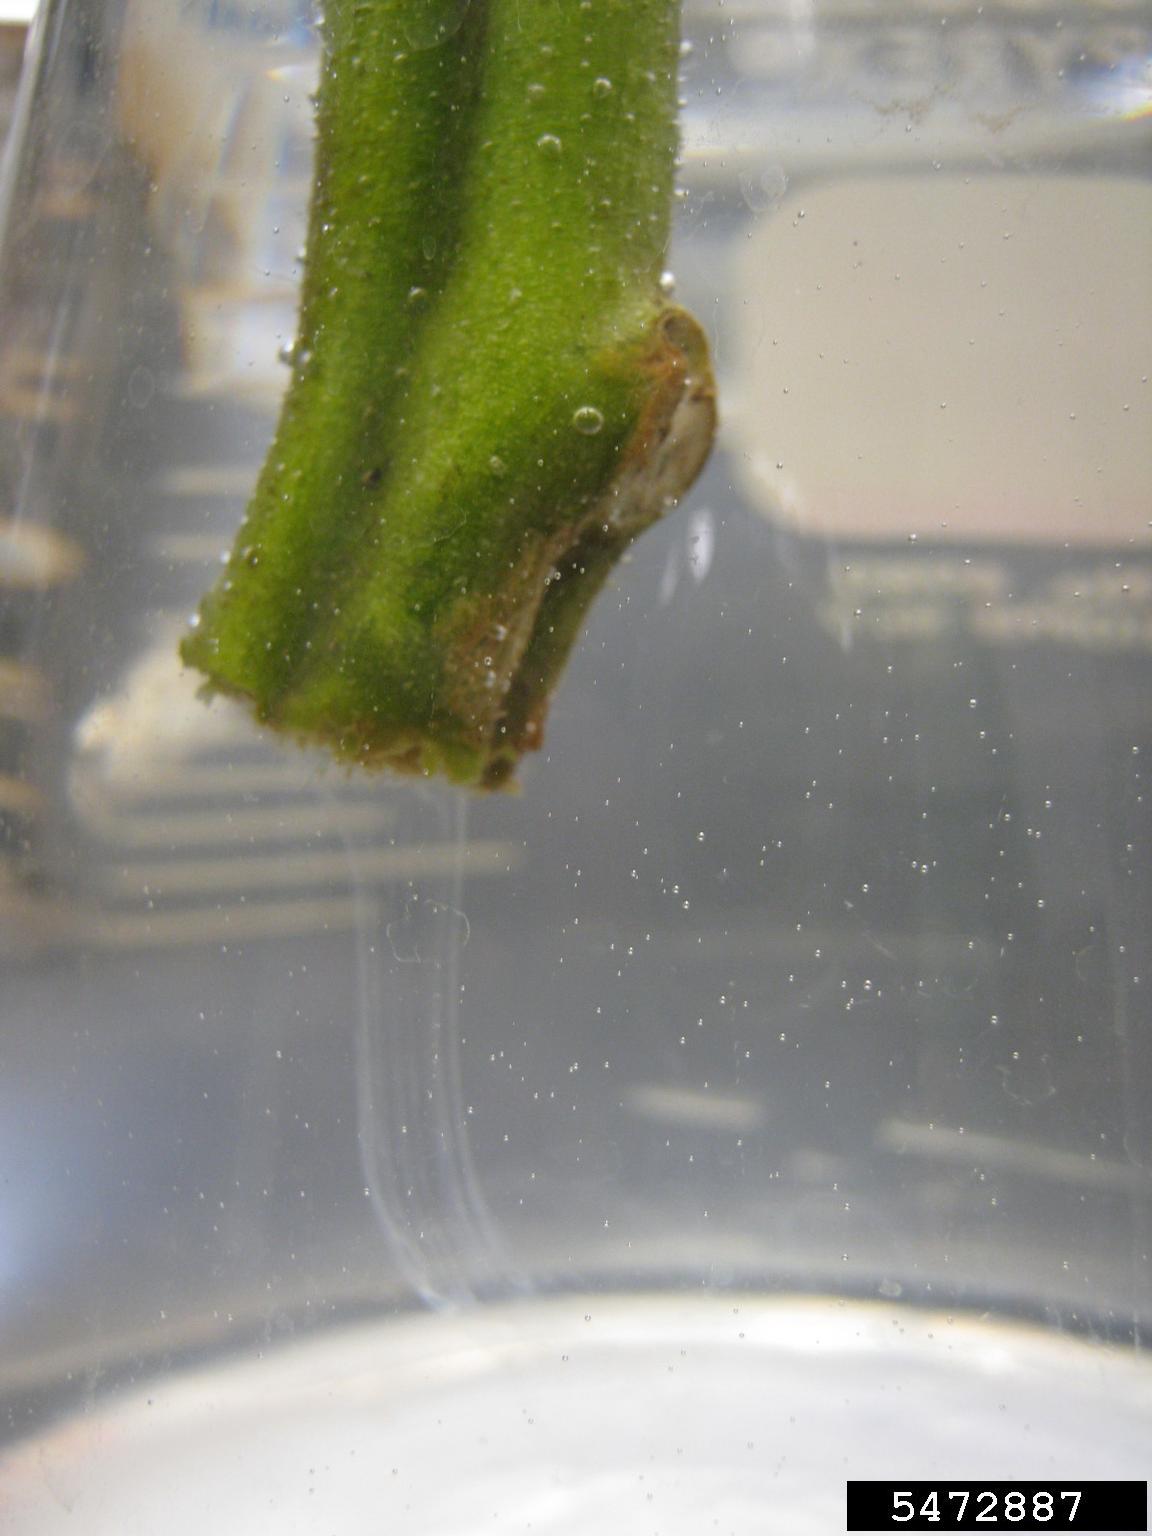 photo credit: Jason Brock, University of Georgia, Bugwood.org Caption: The white slimy substance observed here is a strong indicator of the southern wilt bacterium is present.